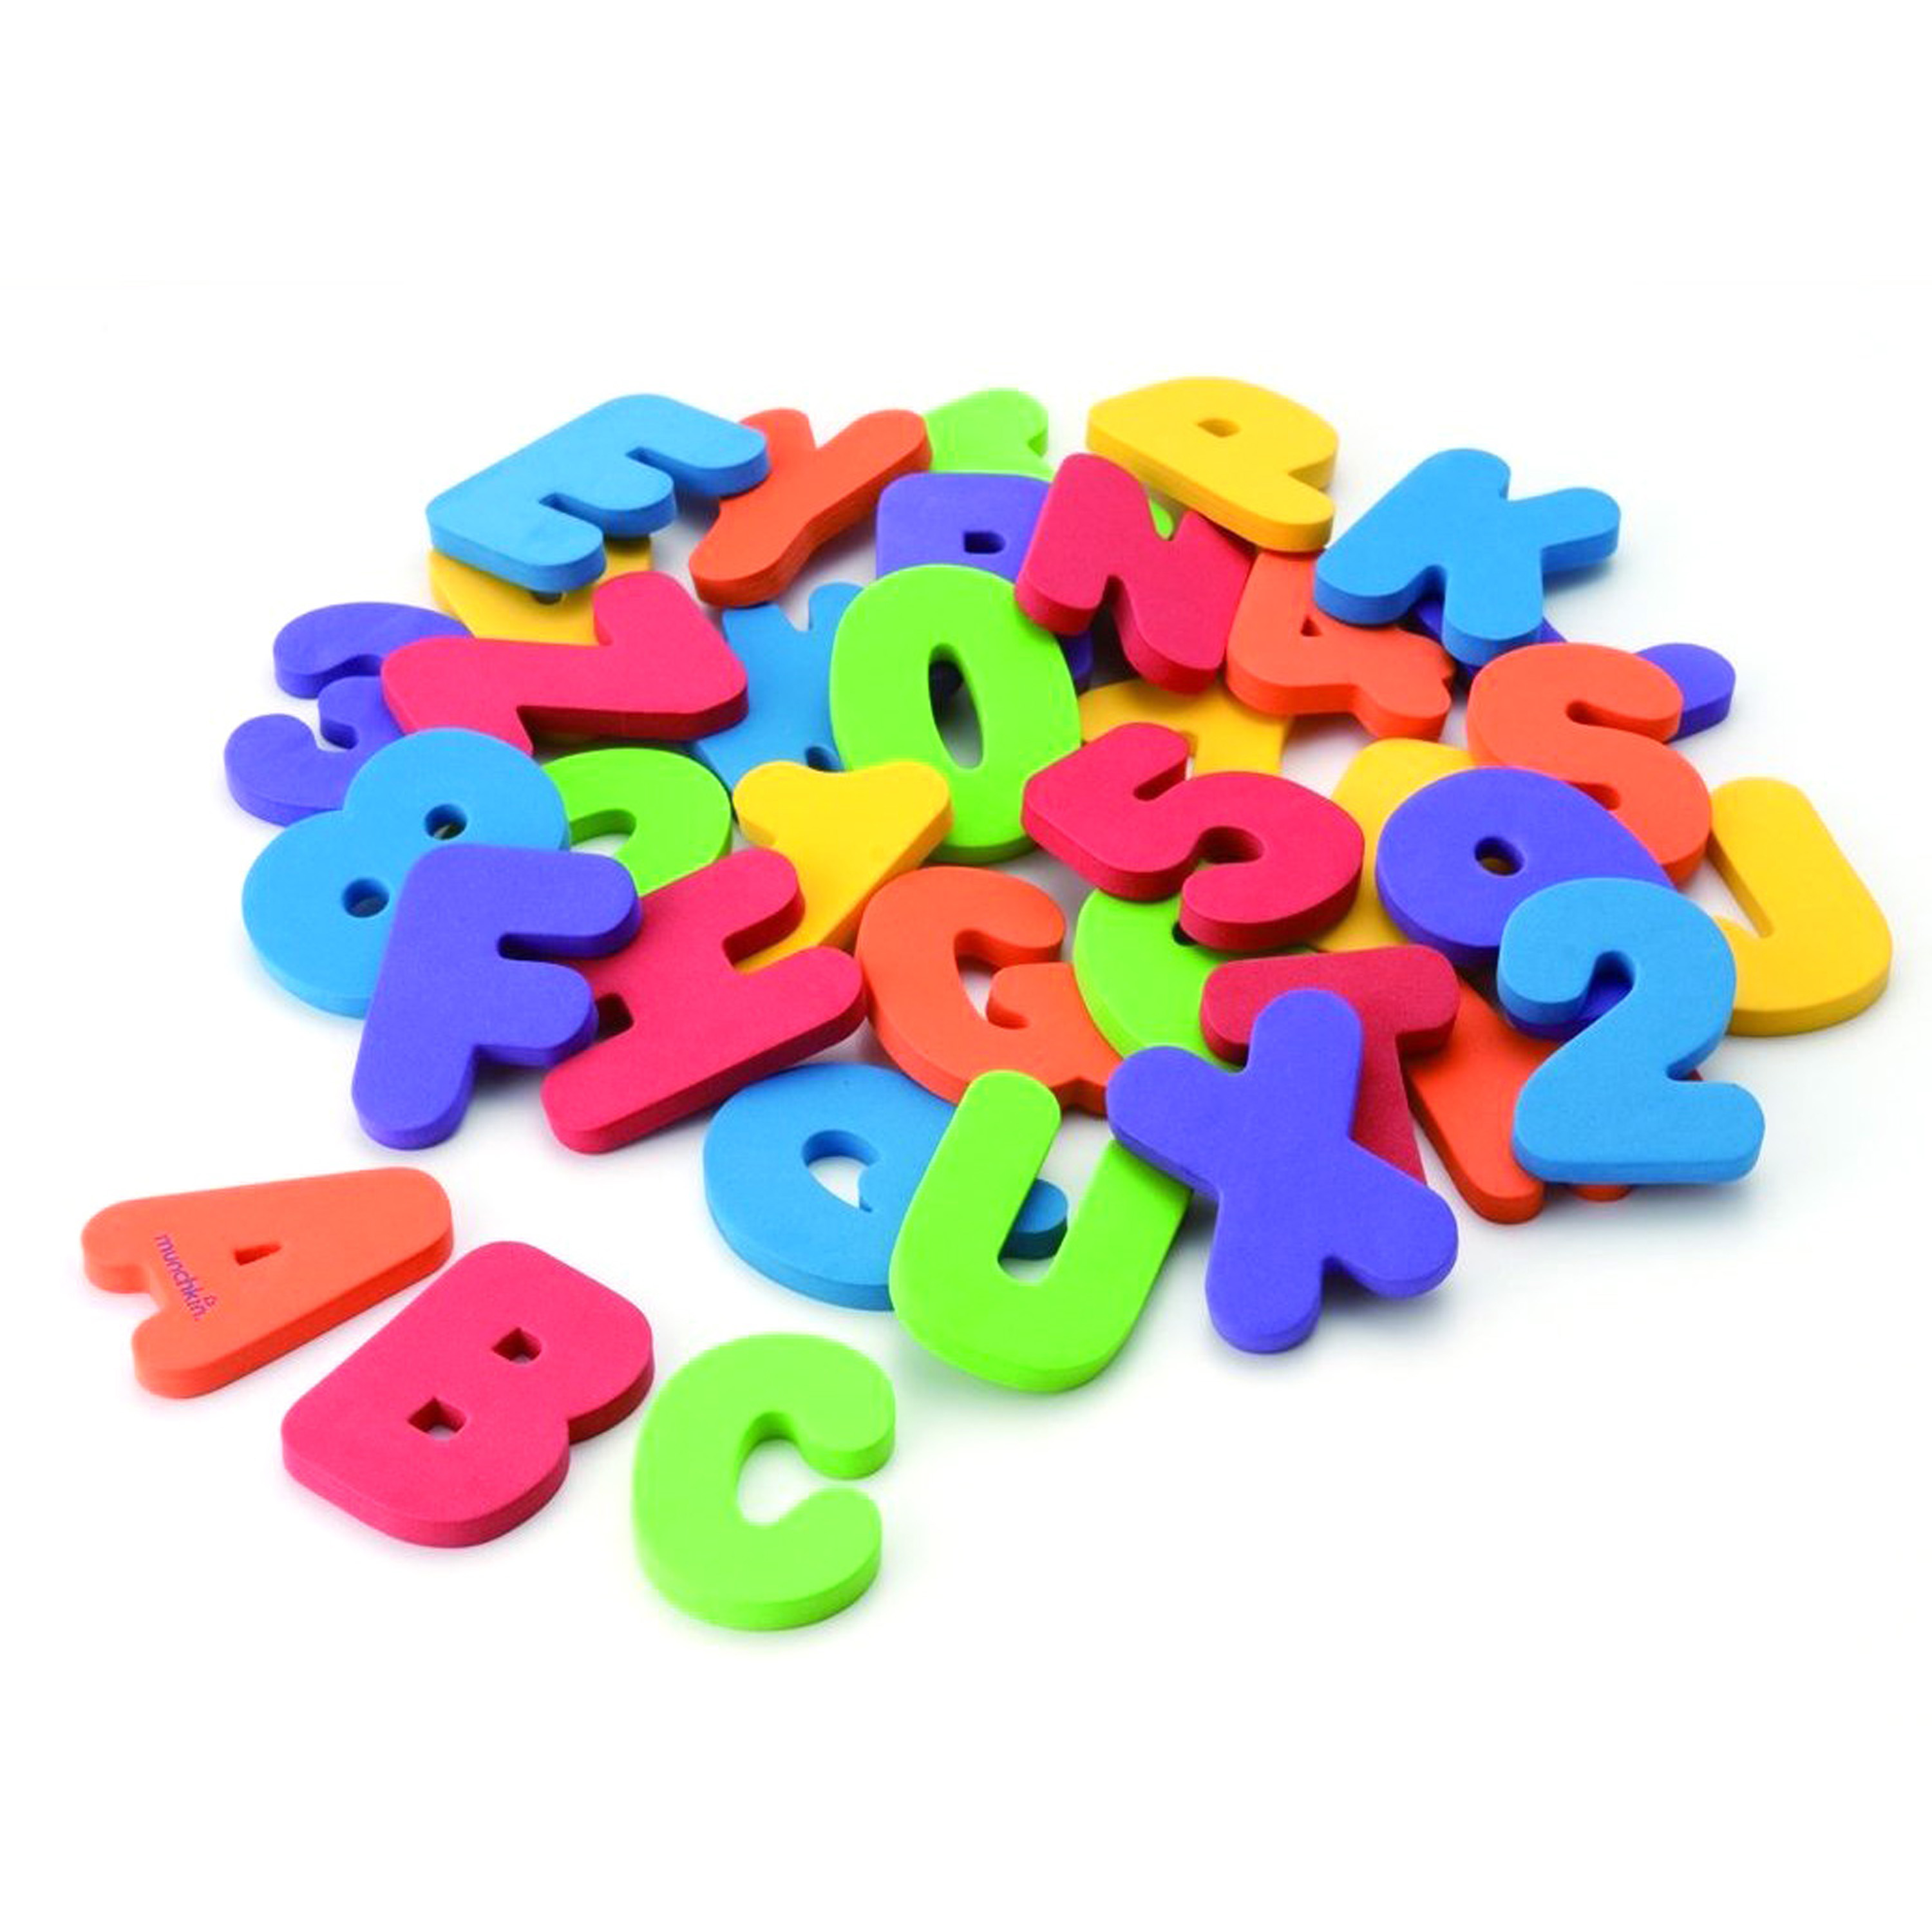 Munchkin Letters and Numbers Bath Toy, Non-Toxic, Multi-Color, 36 Count - image 4 of 8